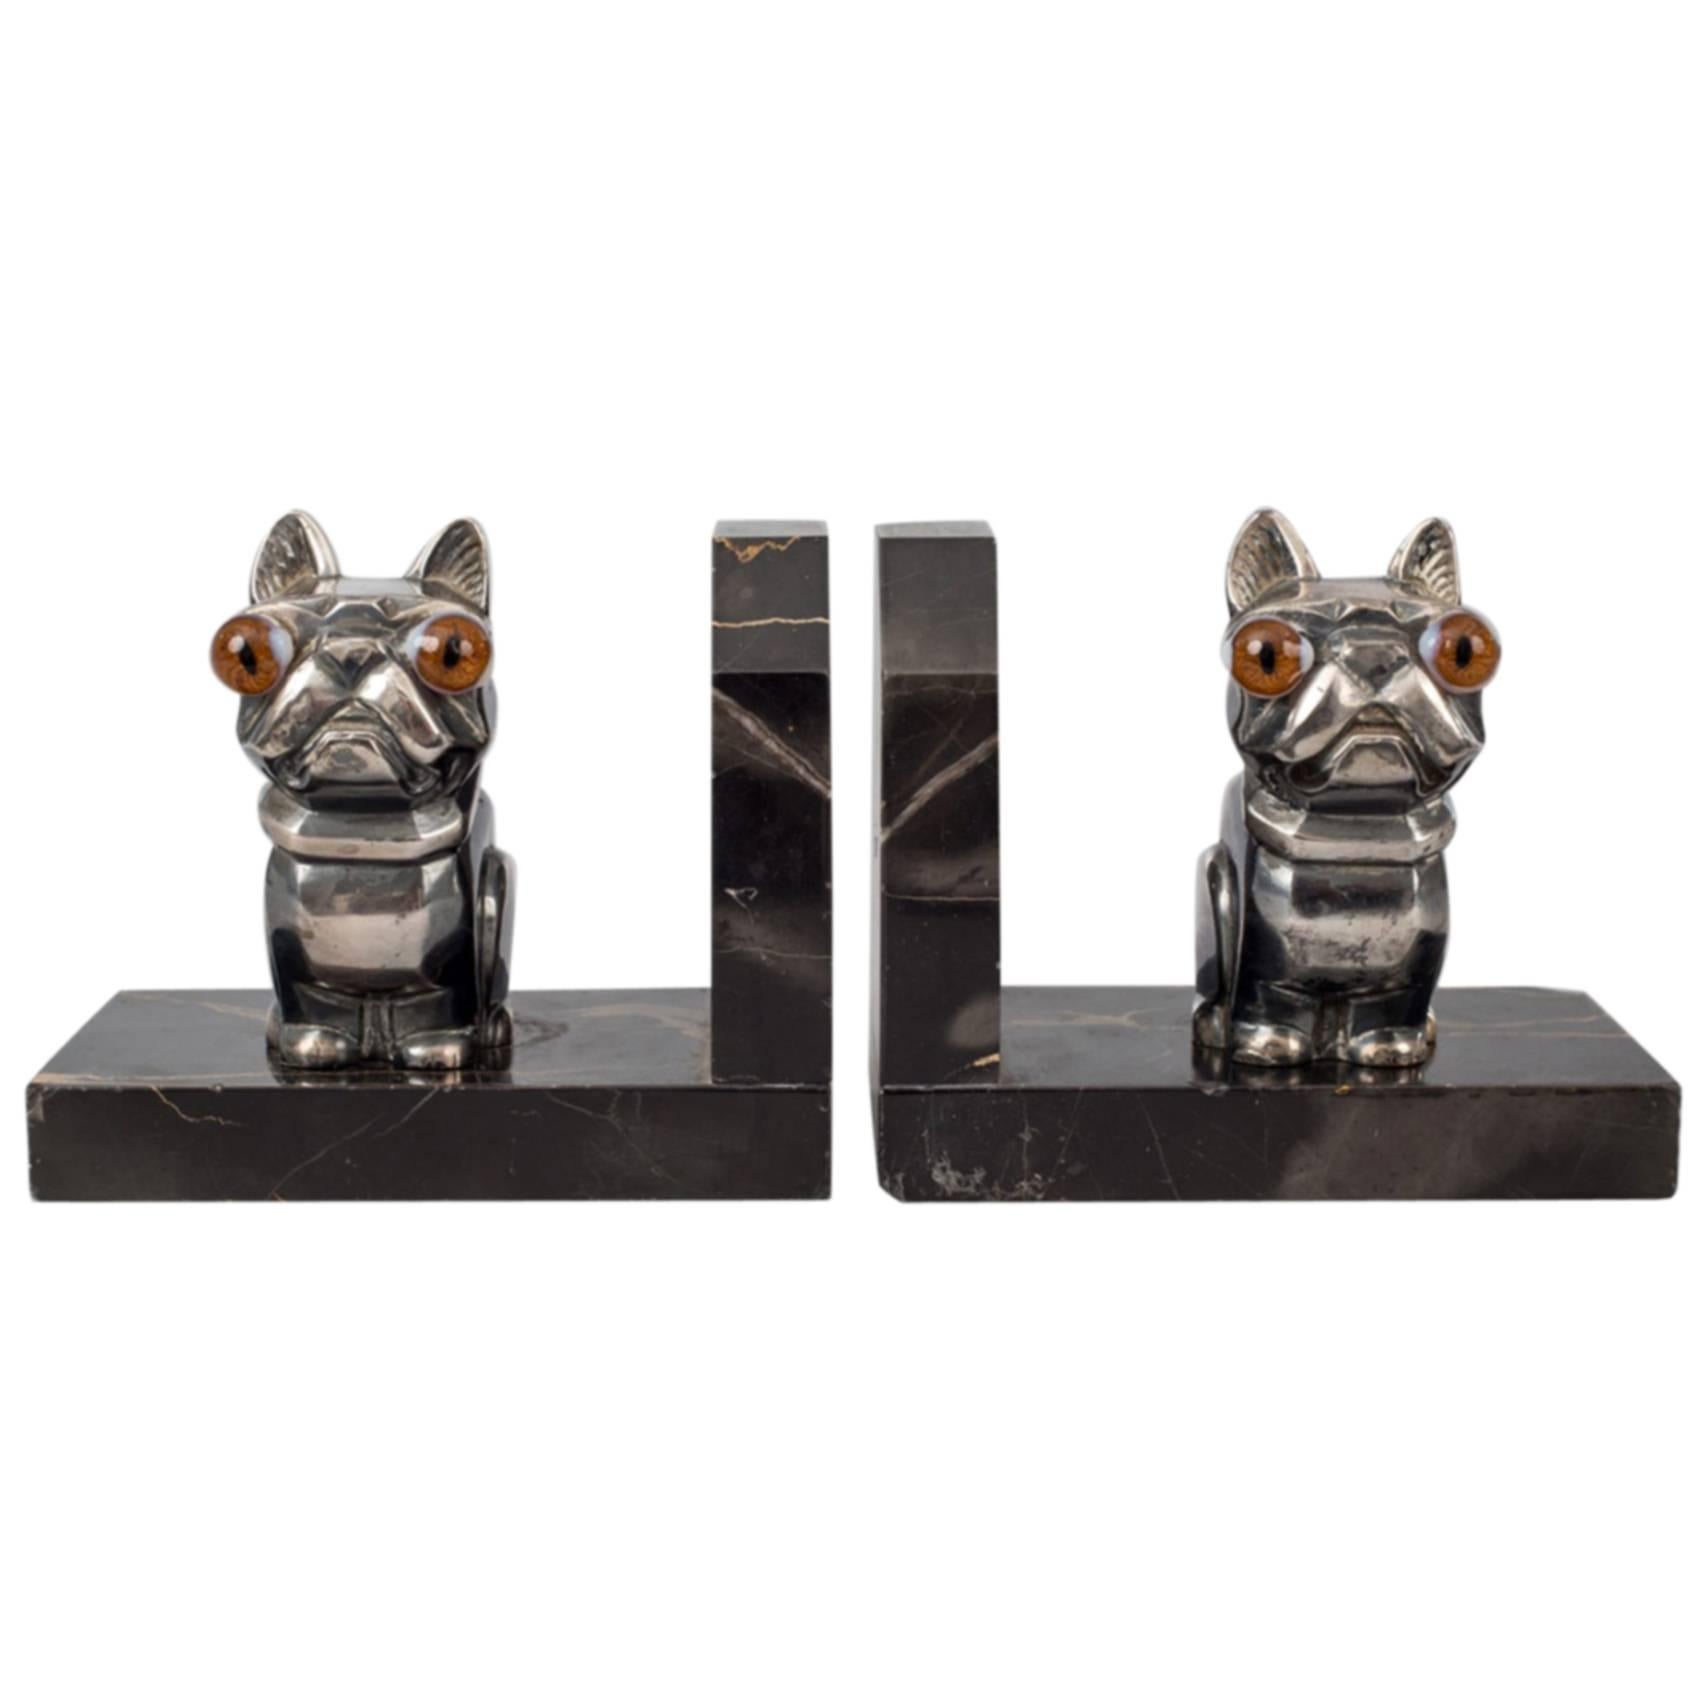 Pair of French Art Deco Bookends by H. Moreau "Hippolyte François Moreau" For Sale